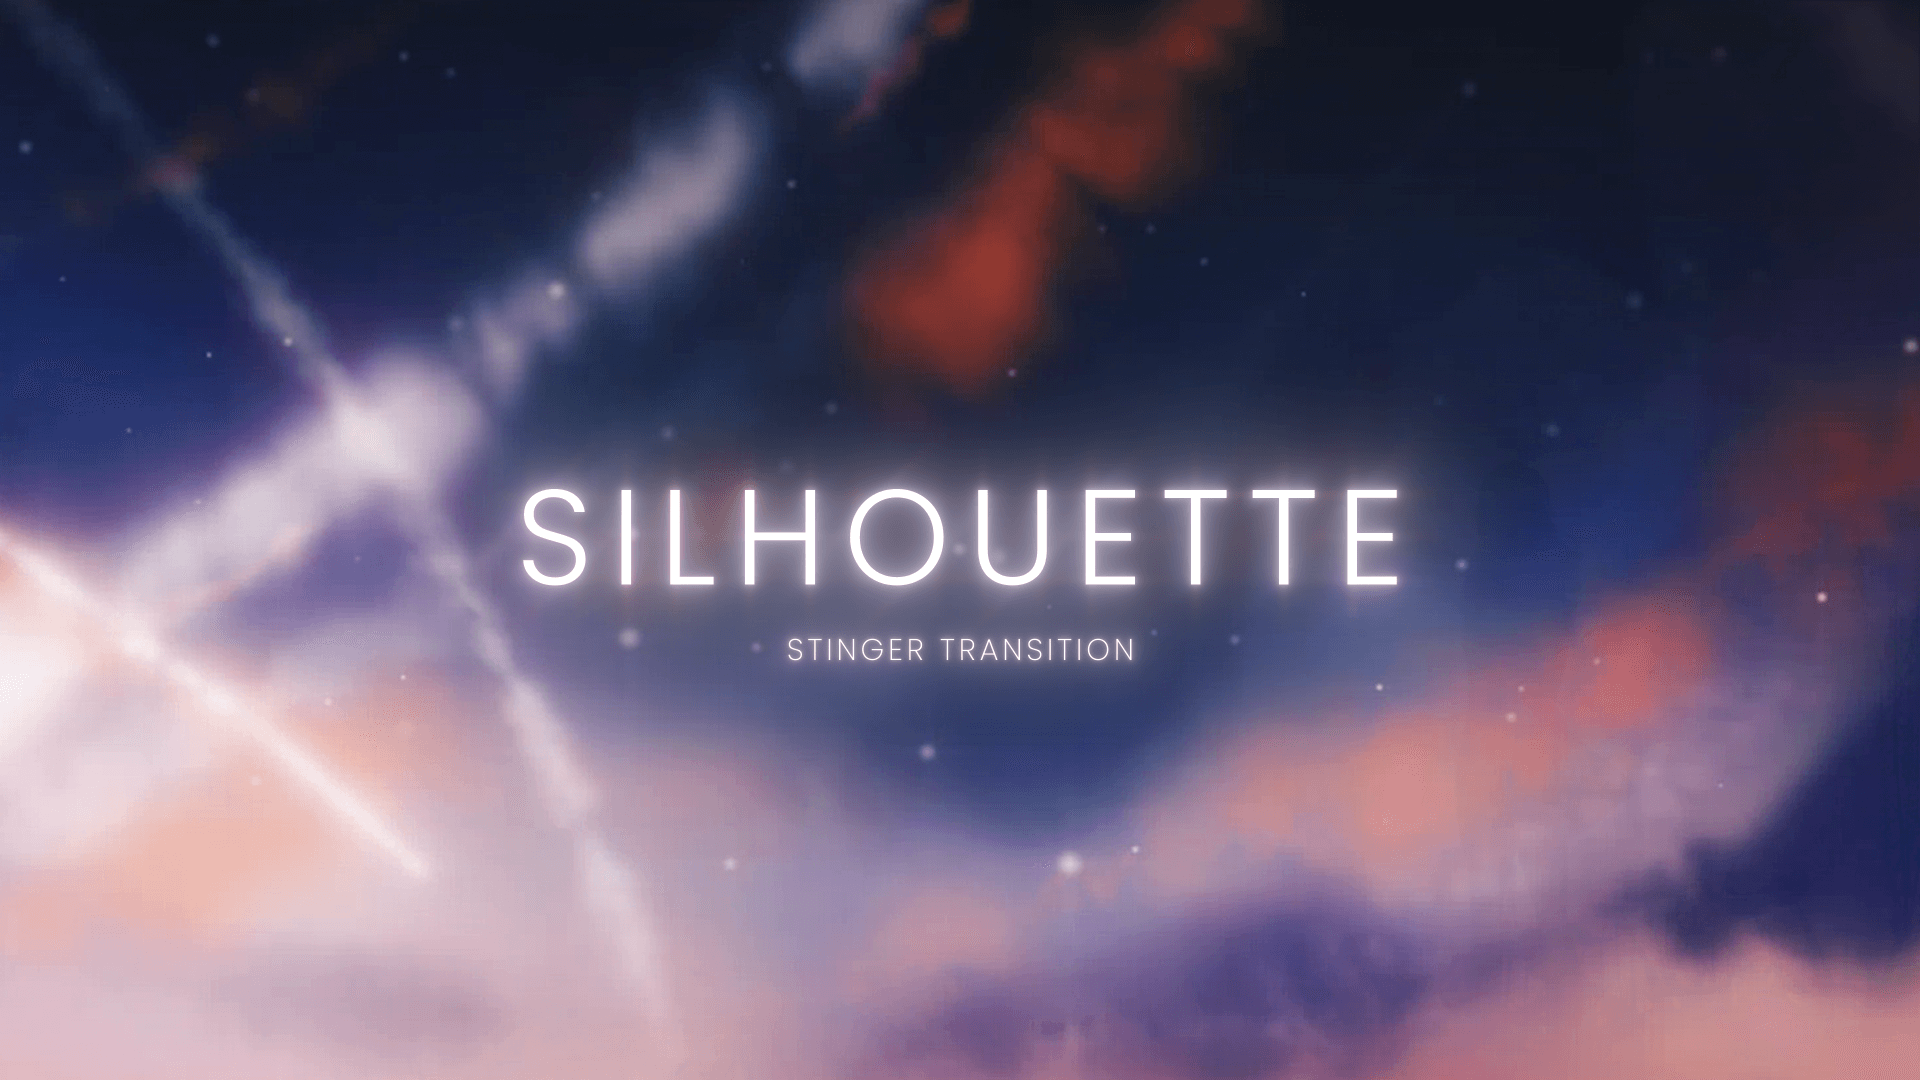 Silhouette - Stinger Transition for Twitch, Youtube and Facebook